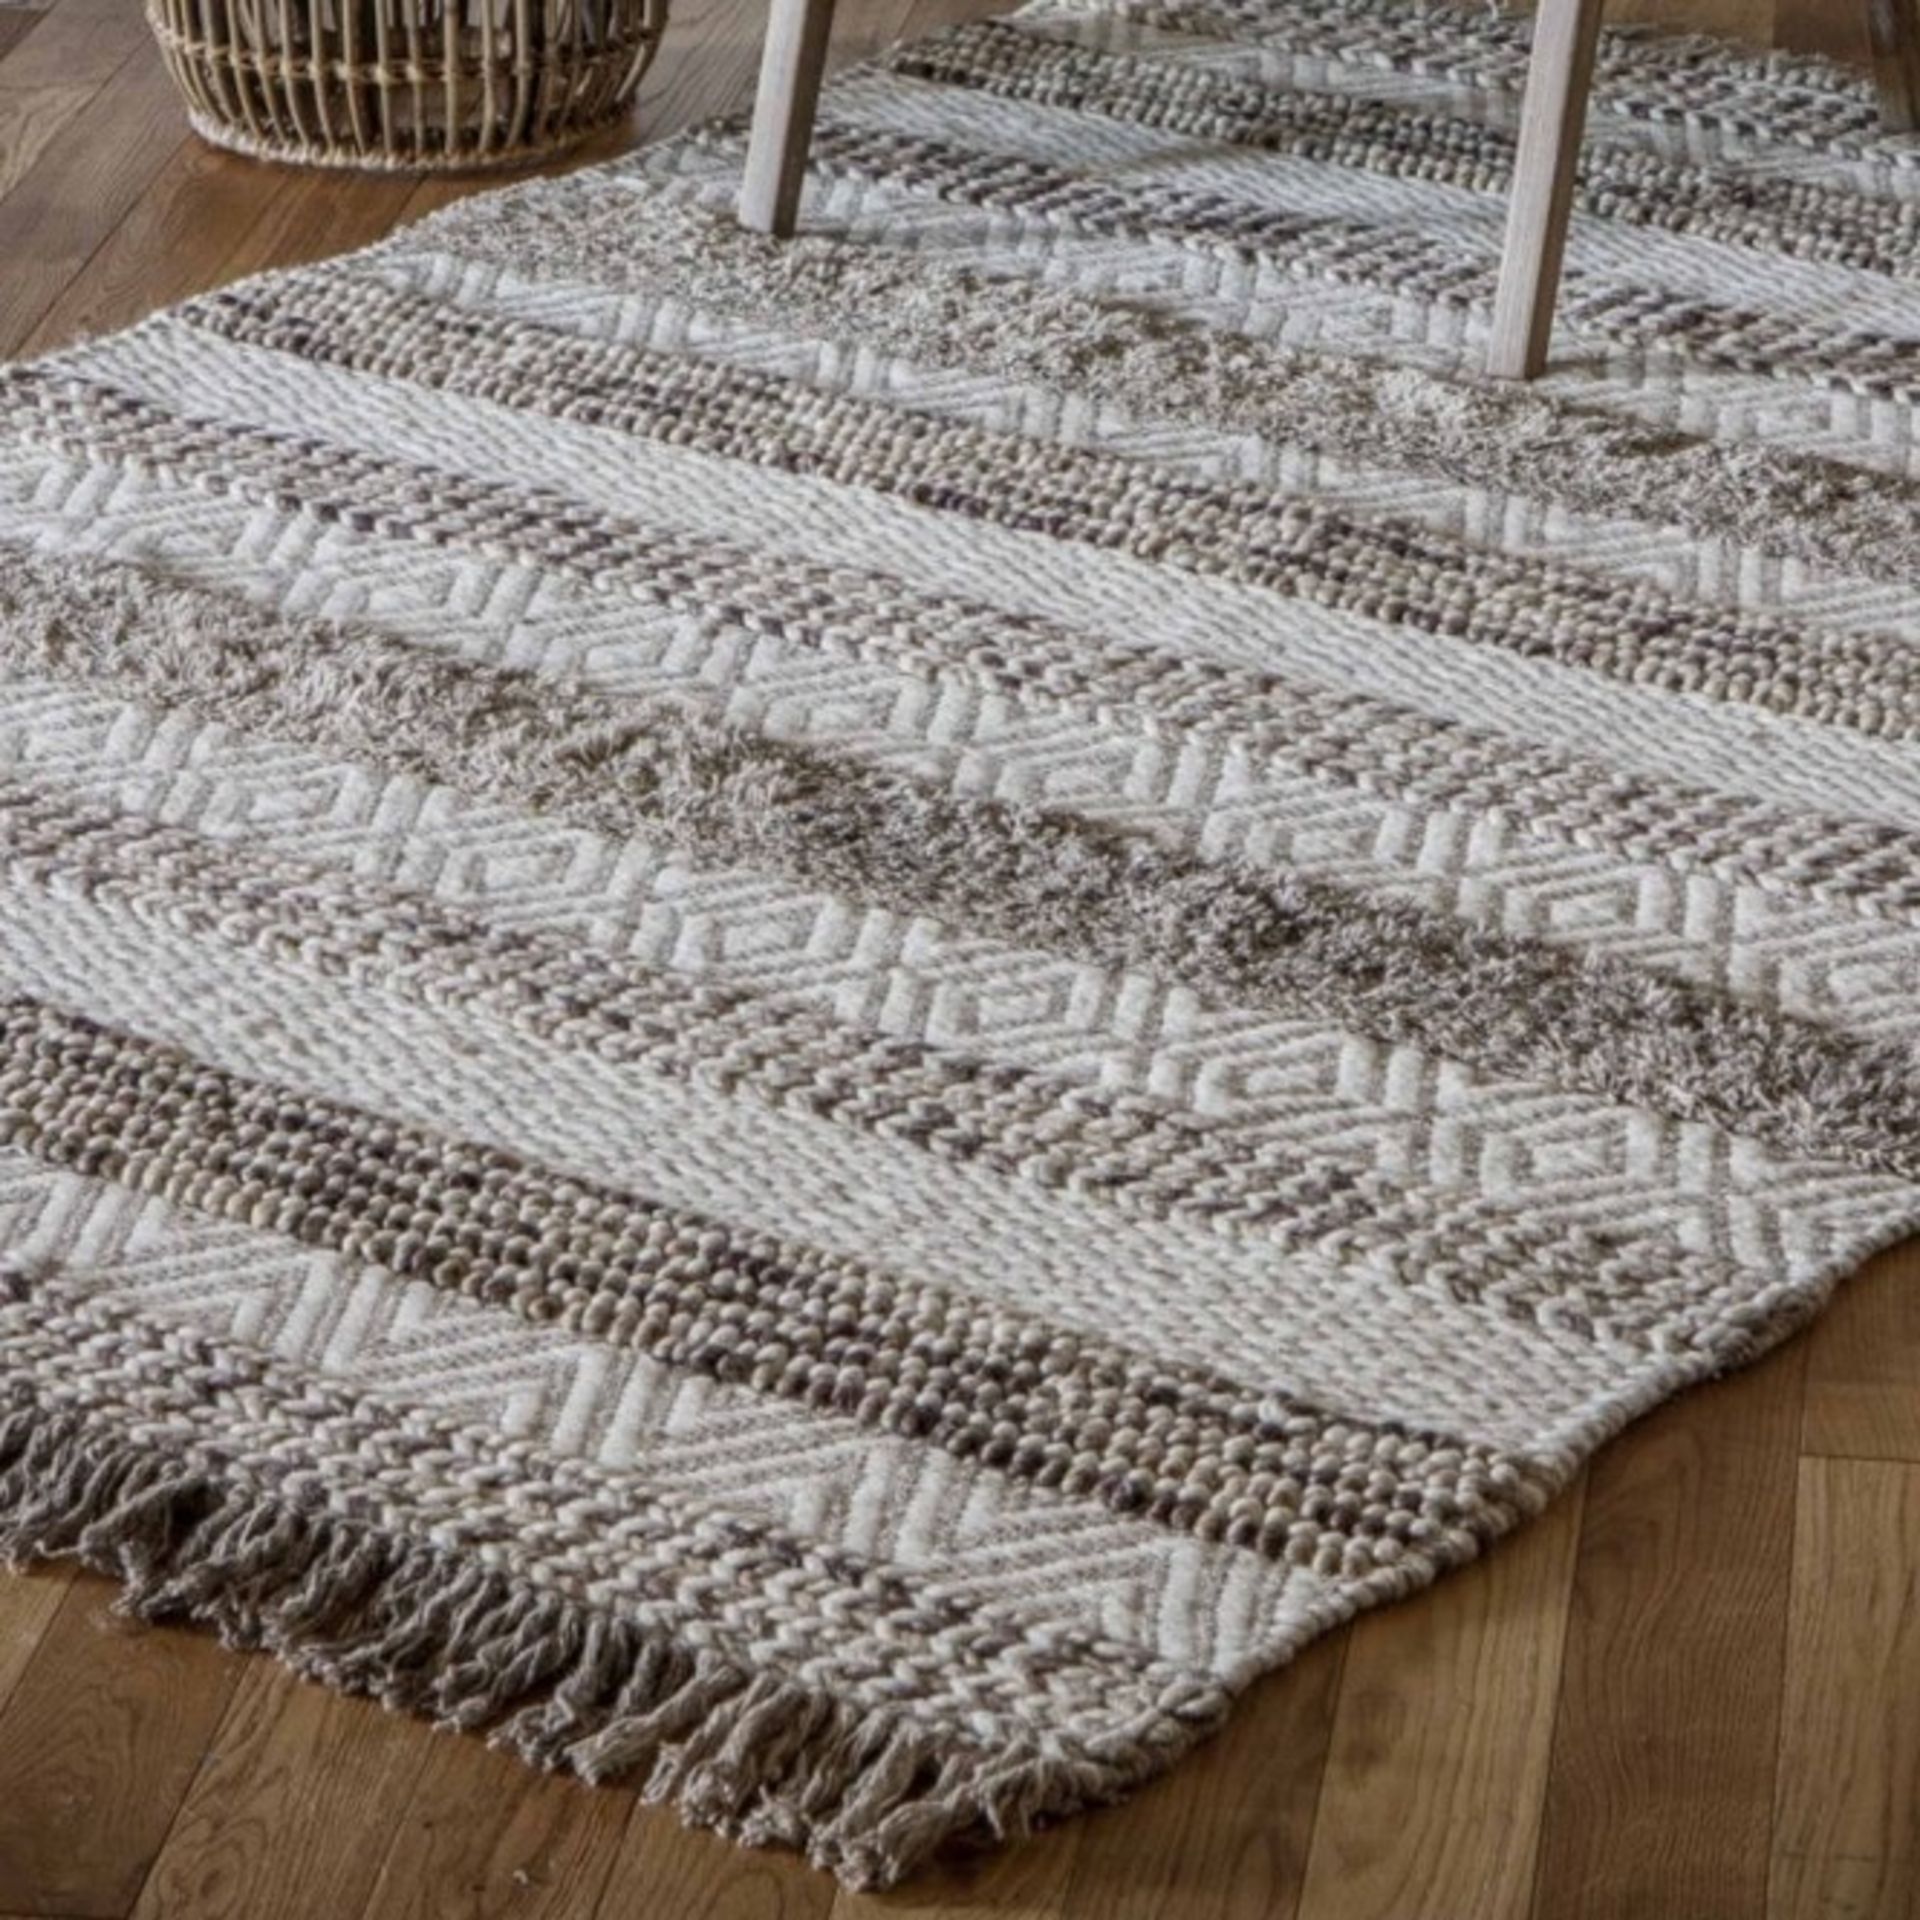 Ludiene rug Ivory 1600 x 2300mm The Ludiene Rug Ivory is the latest addition to our range of home